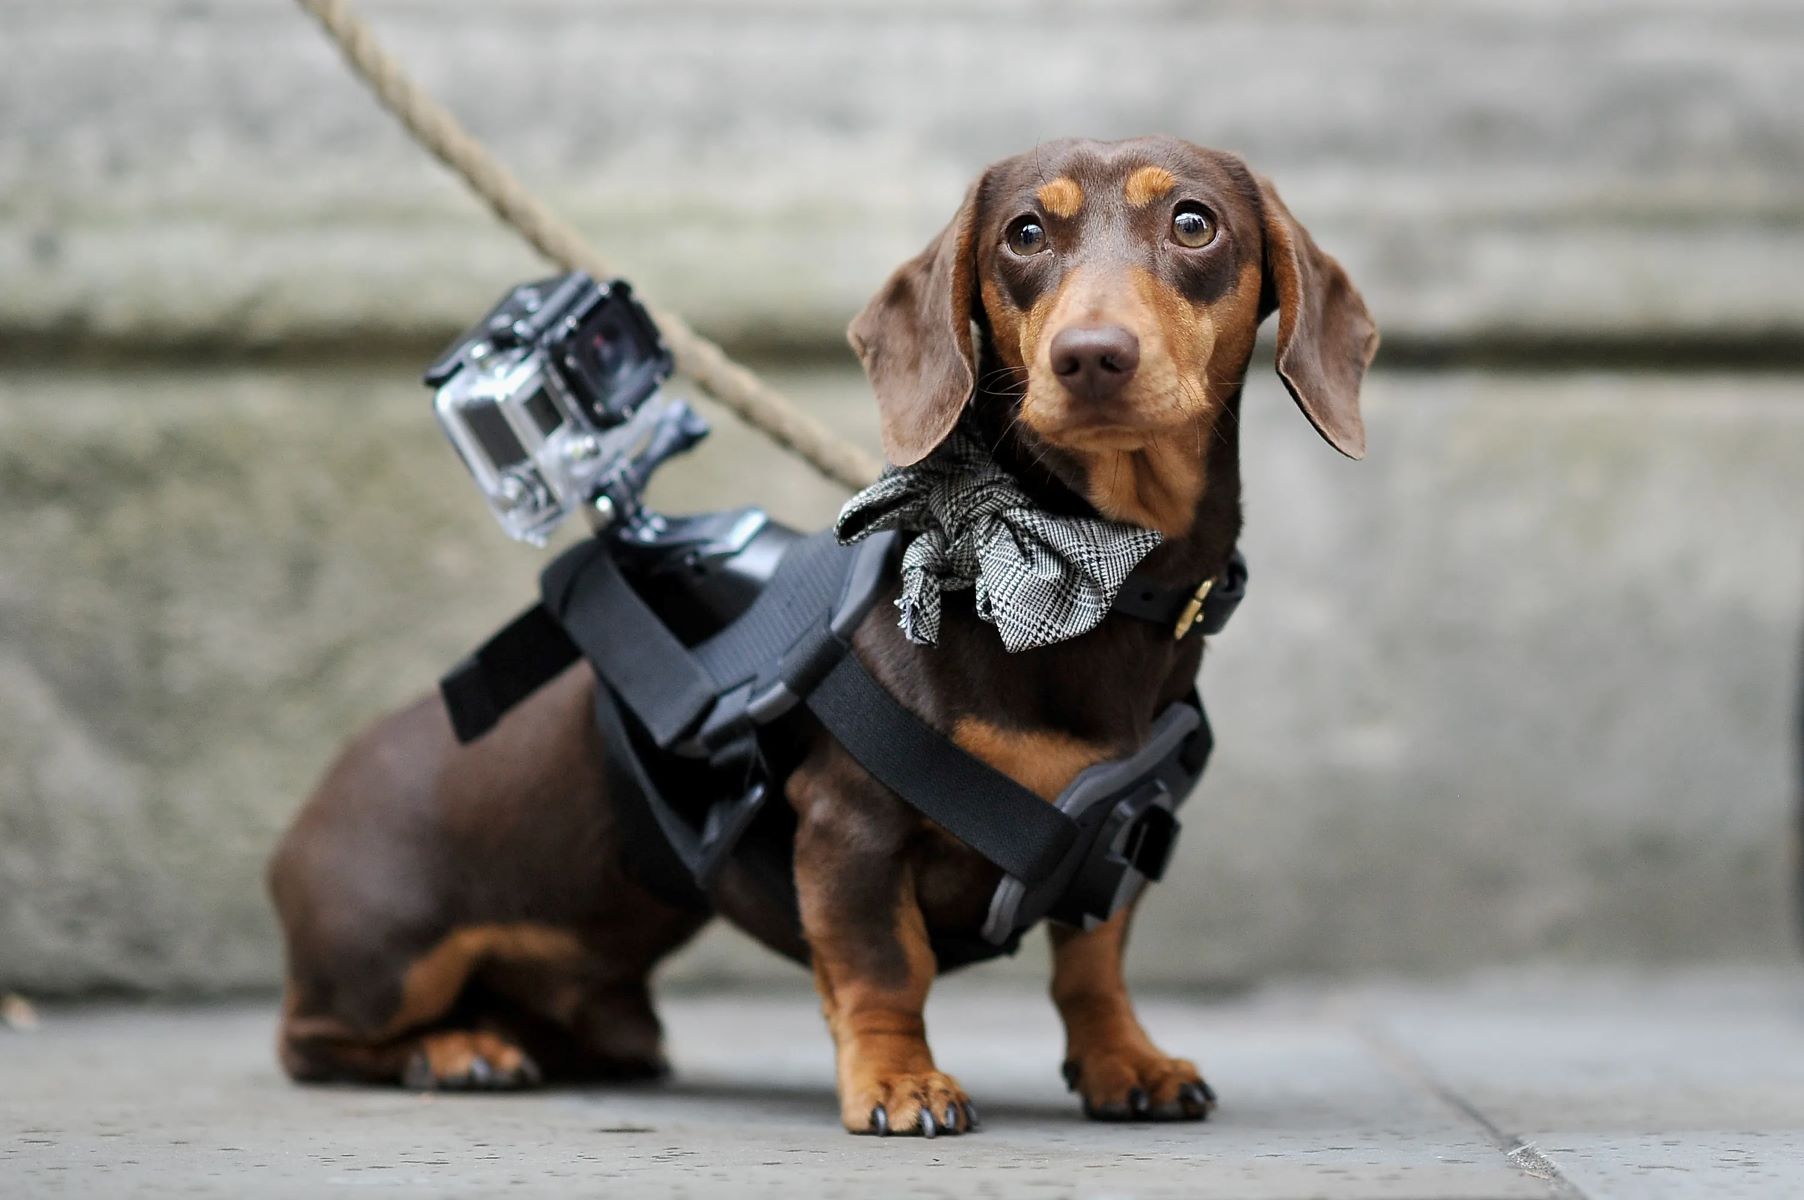 How To Mount An Action Camera To A Dog For Minimum Bounce